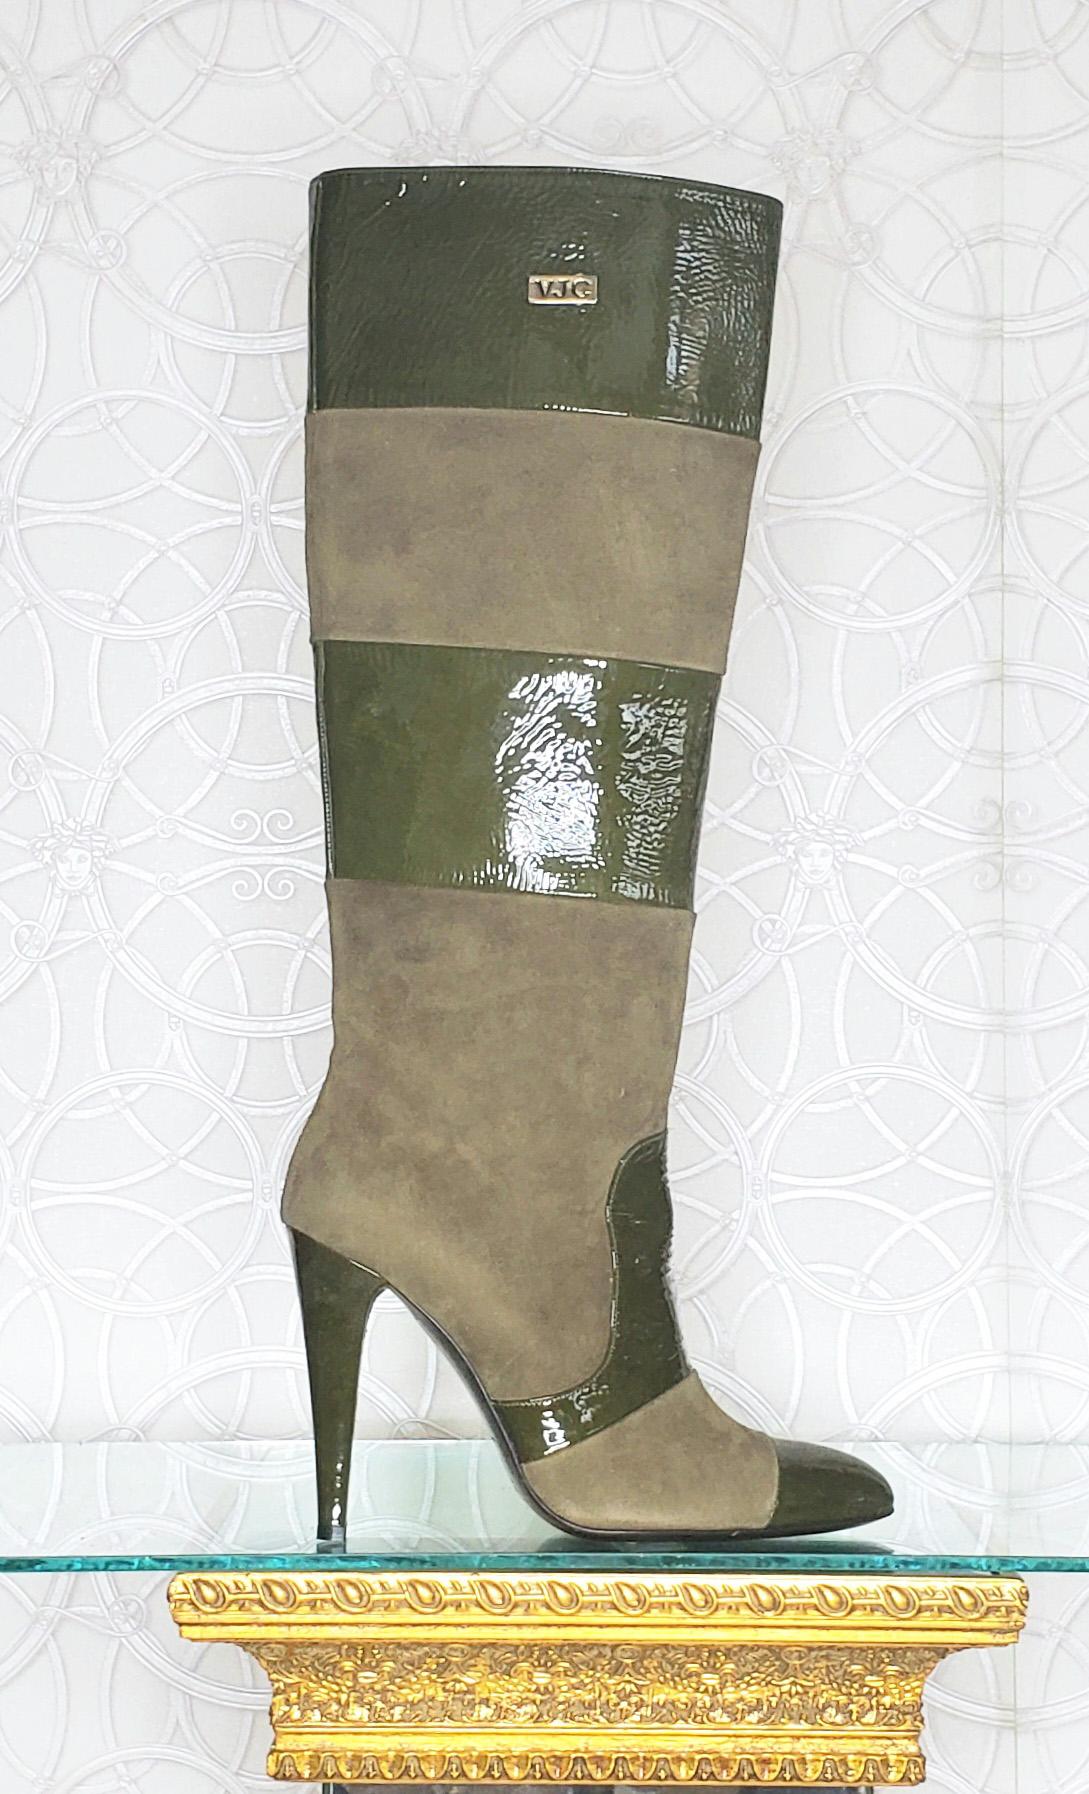 VERSACE VJC BOOTS



Green Suede and Patent leather boots with gold hardware


Content: 
100% Leather and Suede upper

lining: Smooth 100% gold leather 

Heel height: 4 1/2